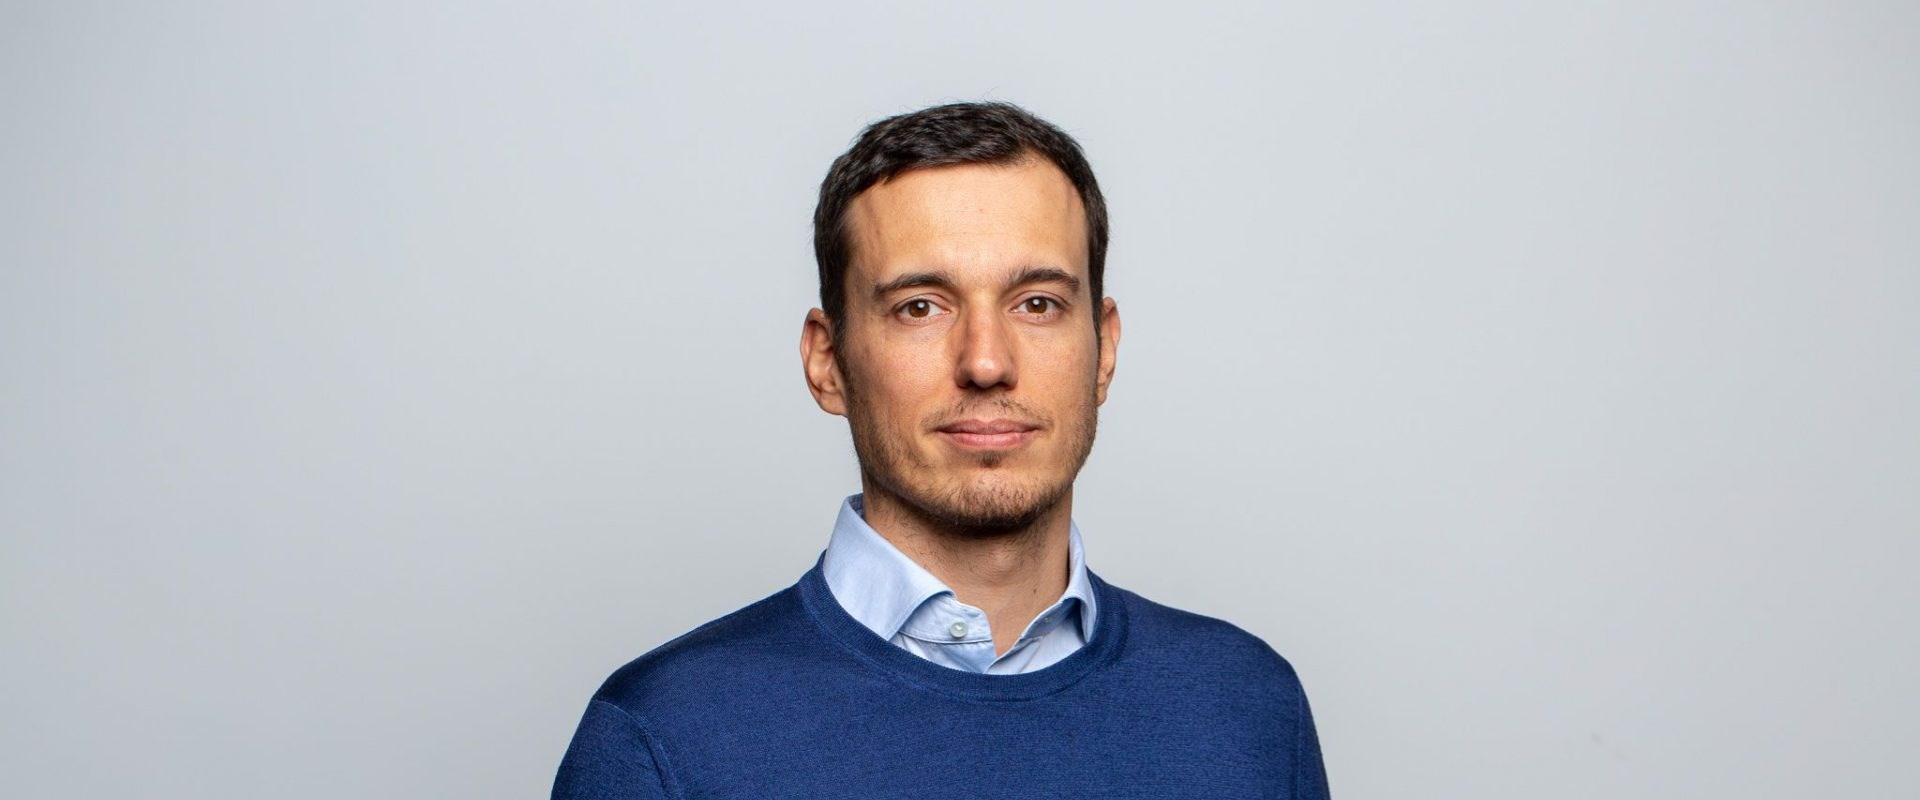 Vassil Terziev, managing partner at Eleven Ventures and one of the first investors in Payhawk - Photo credit: The Recursive